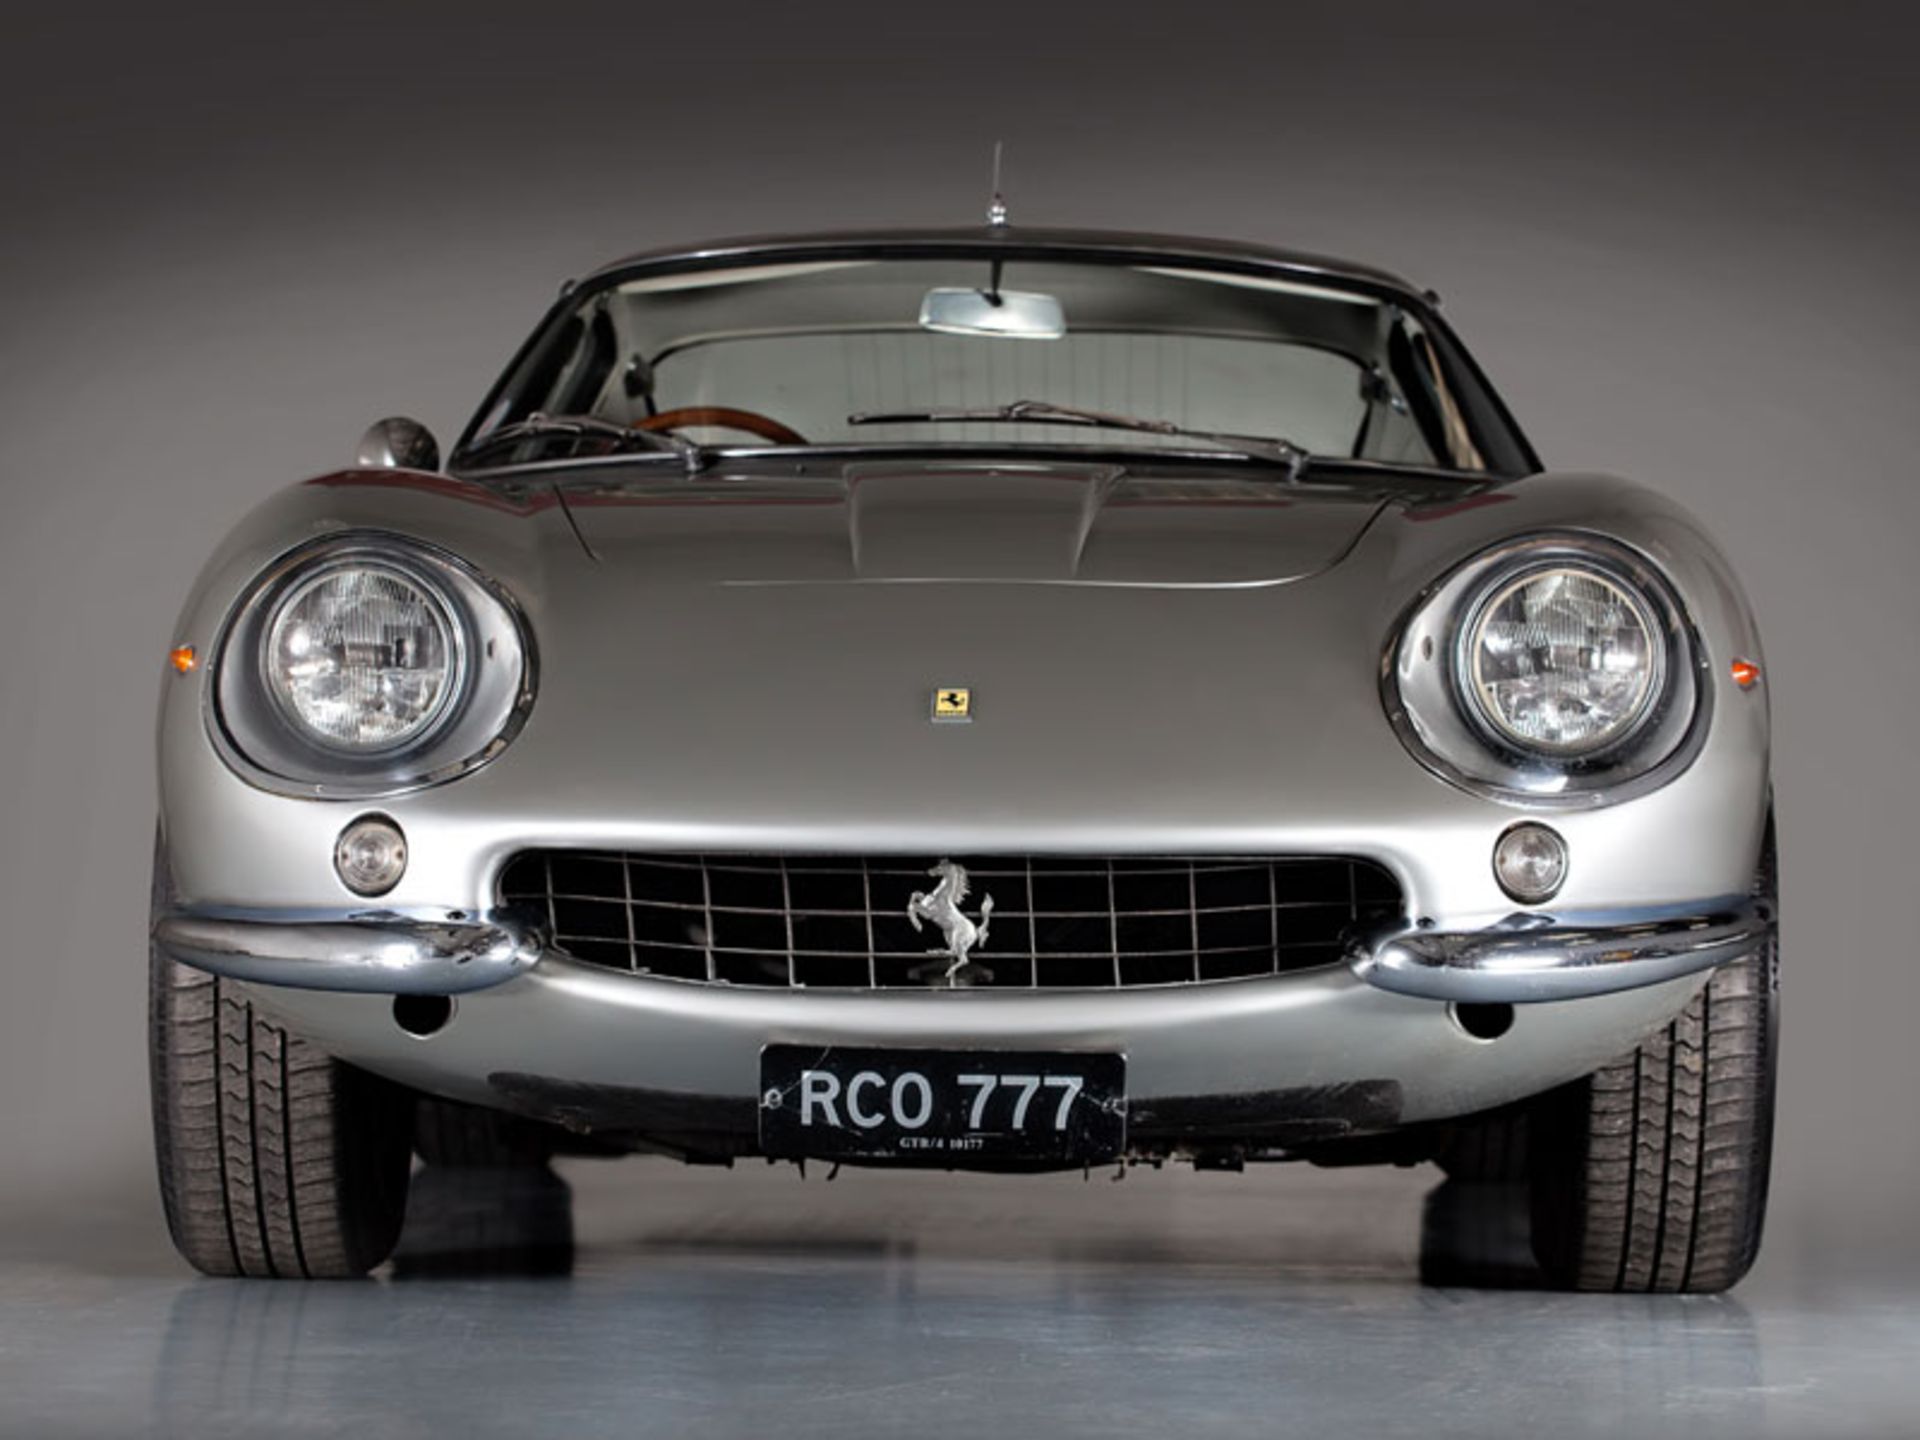 Registering to Bid on the Ferrari 275 GTB/4 from the Richard Colton Collection:
- All Registrations - Image 2 of 10